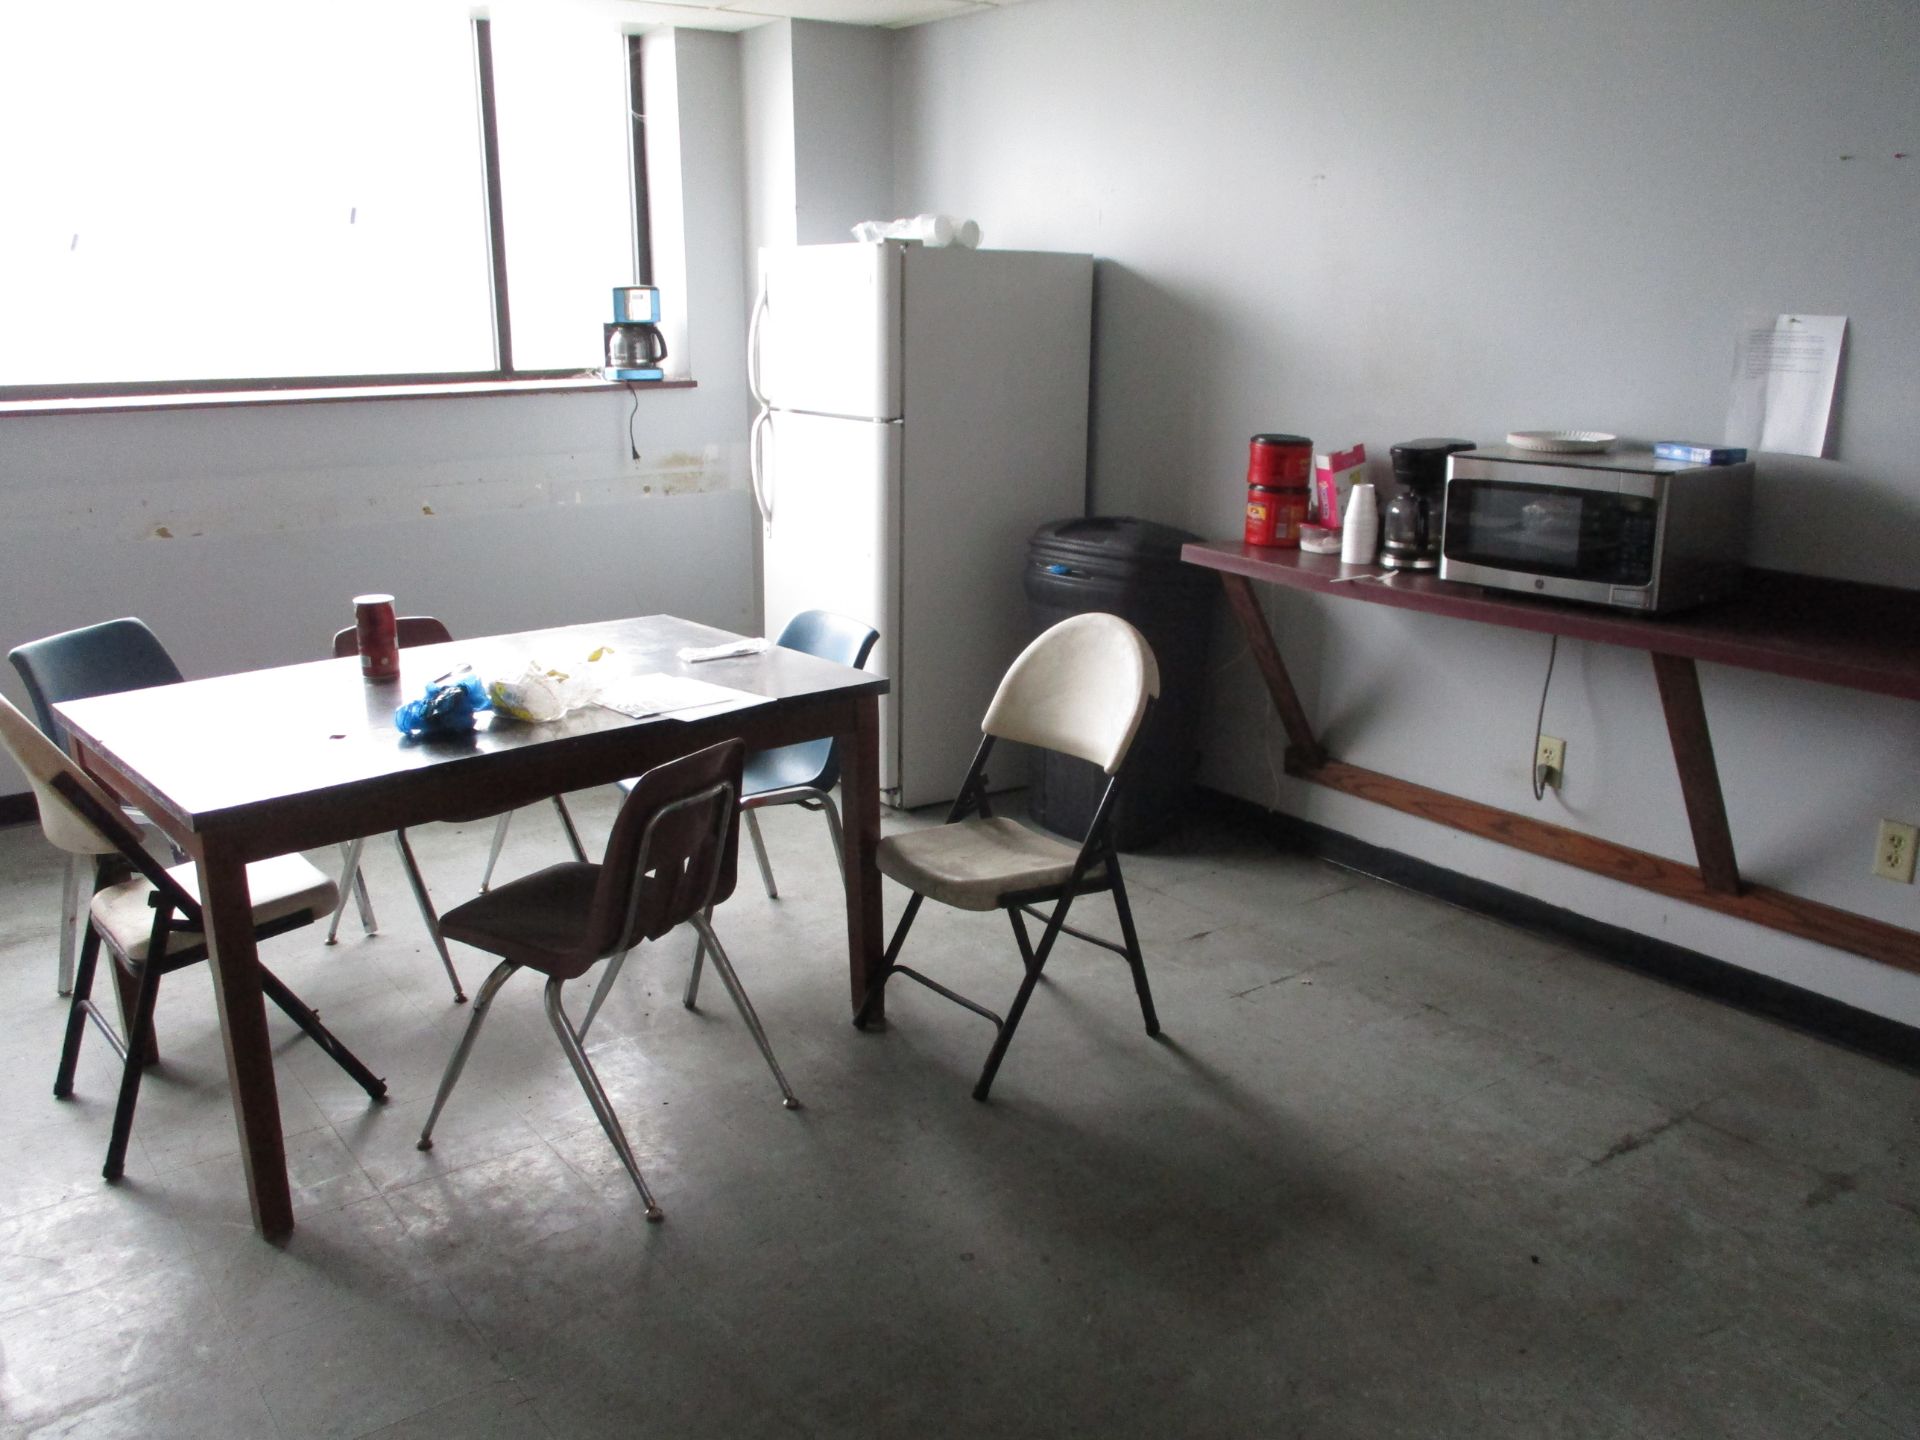 Contents of Lunch Room, Including Table, Chairs, Refrigerator, Coffee Maker, Microwave, and Time